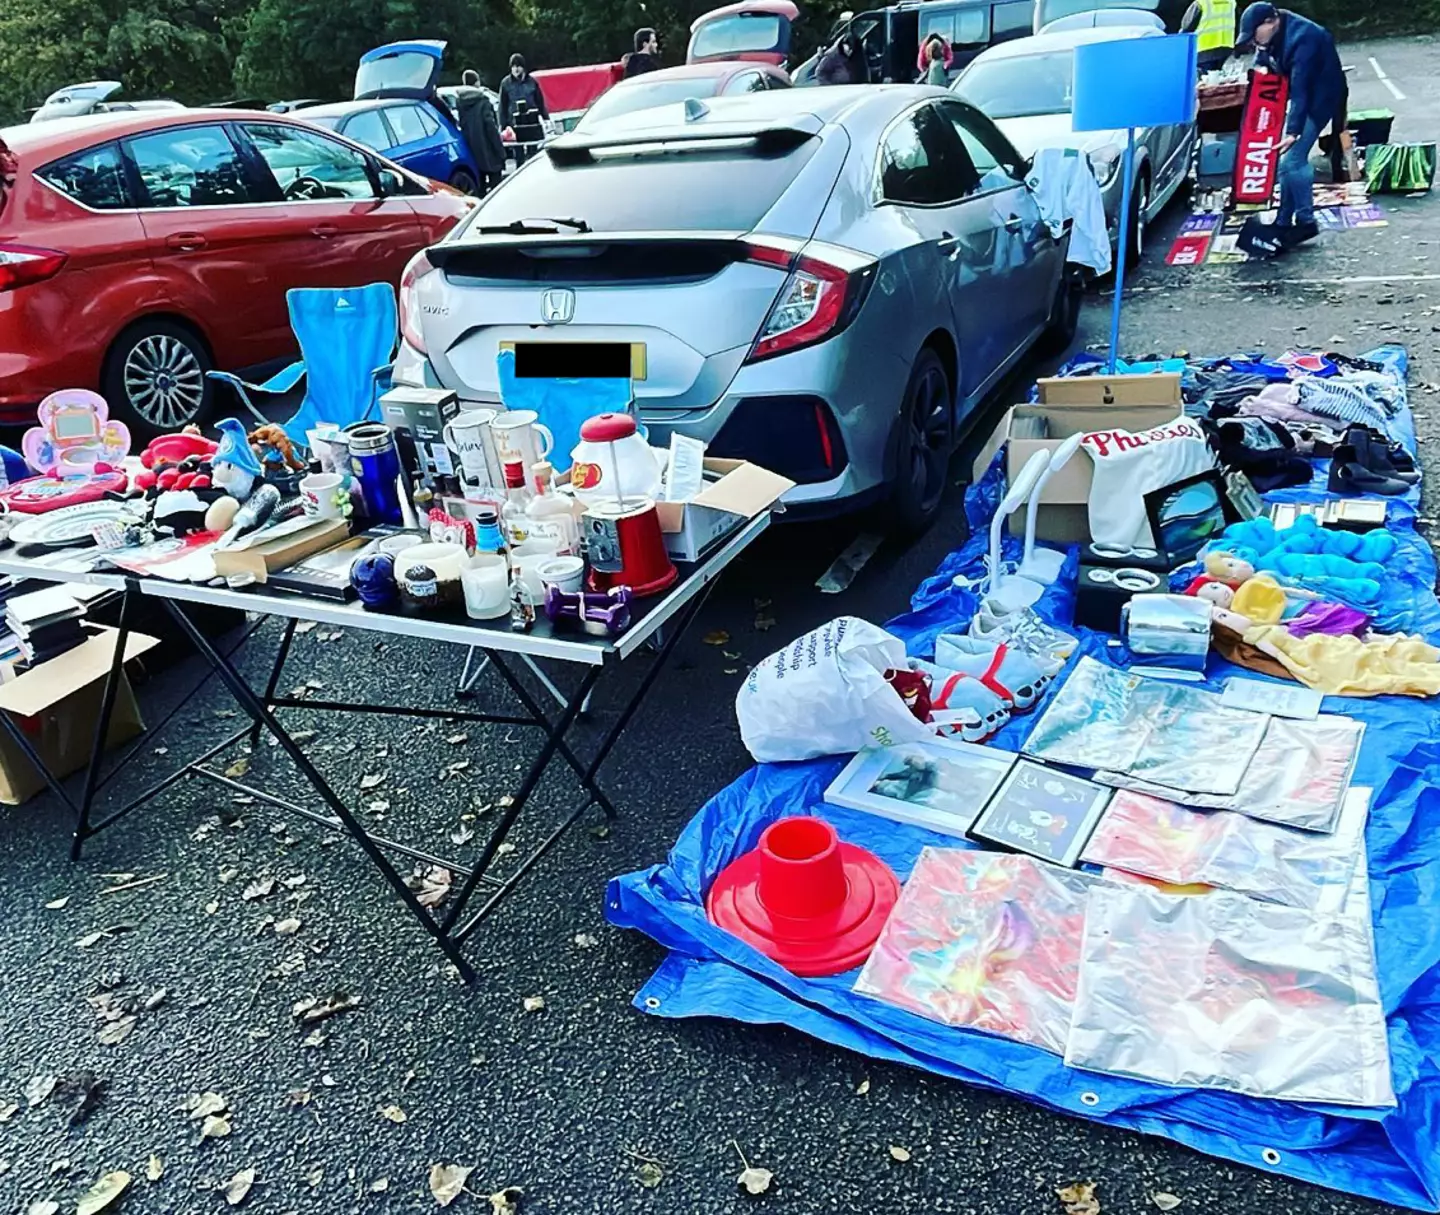 Professional car boot sale reseller Chris Hayden is a master at turning trash into treasure.